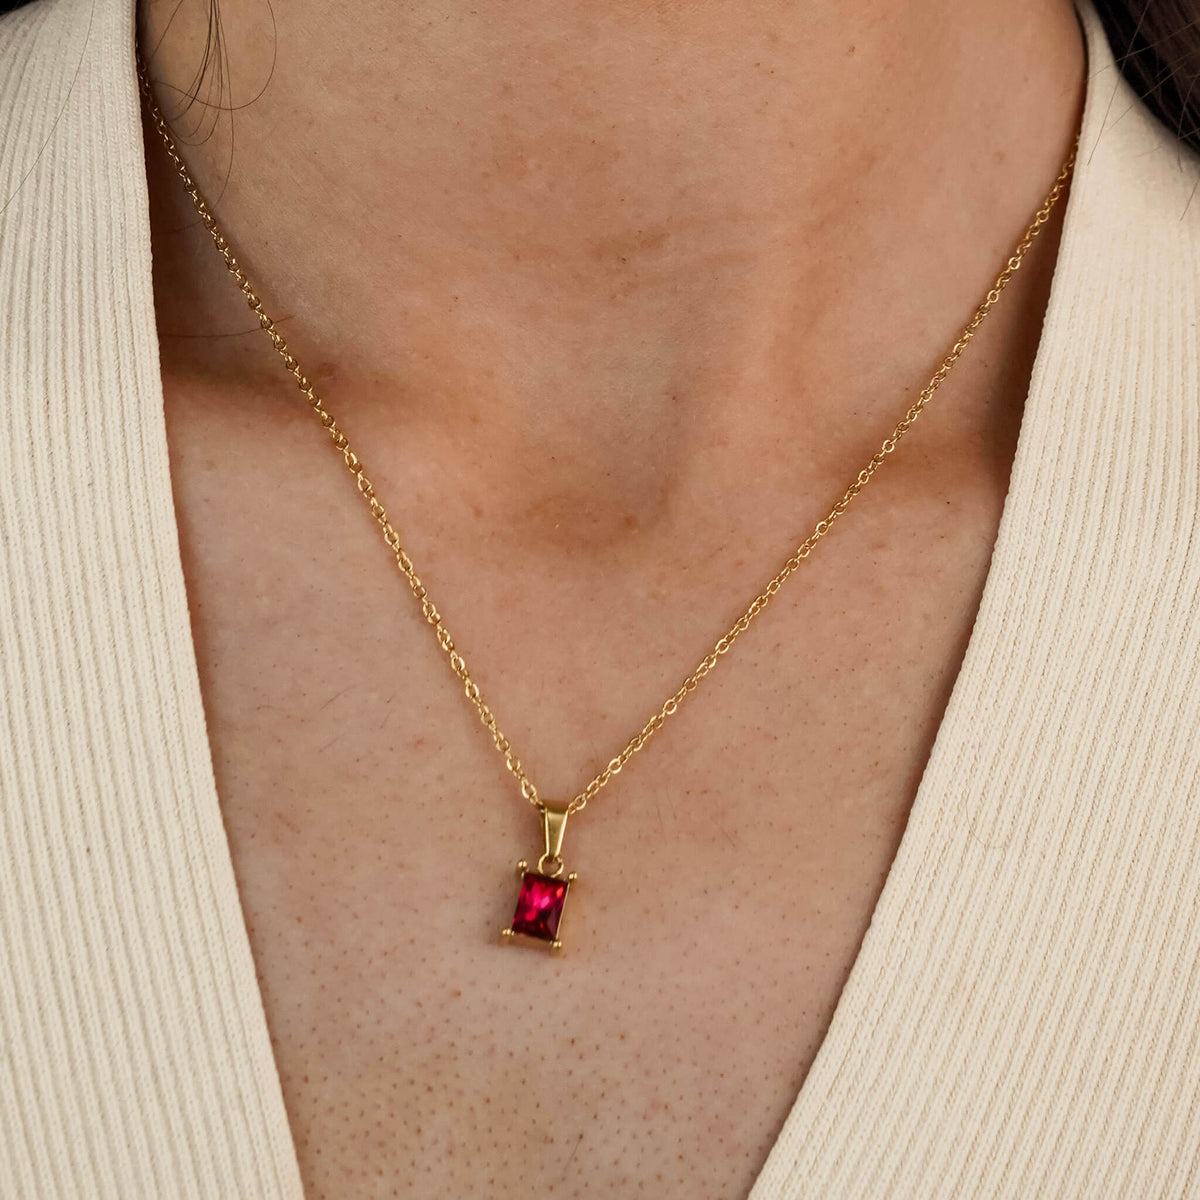 this rubina necklace features a gold stainless steel chain and one single red stone. The stone is an emerald cut stone in the colour of a ruby. 